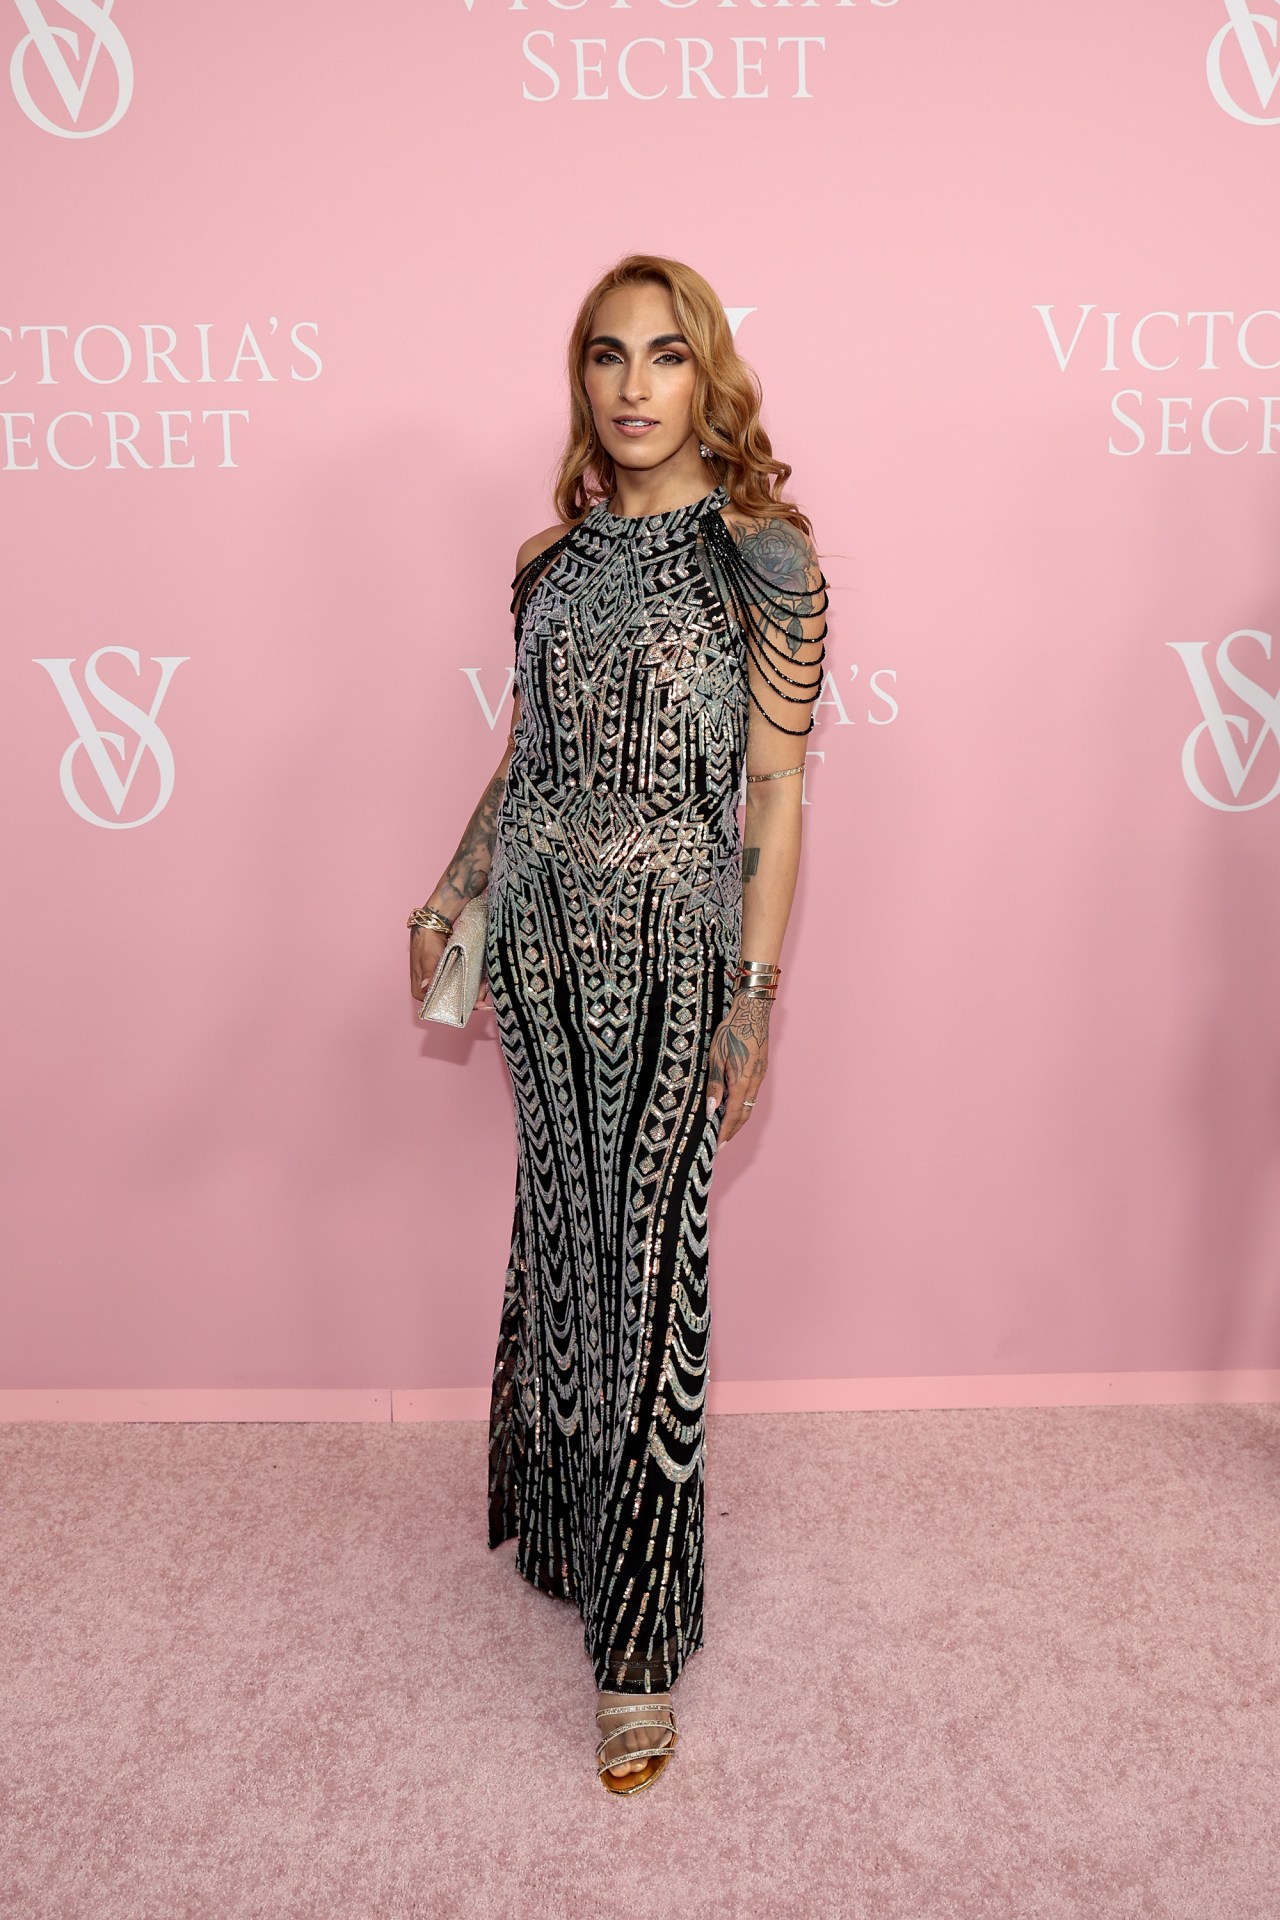 Lori Harvey, 26, shows off amazing figure in just a bra and shows off bra  at the Victoria's Secret World Tour red carpet